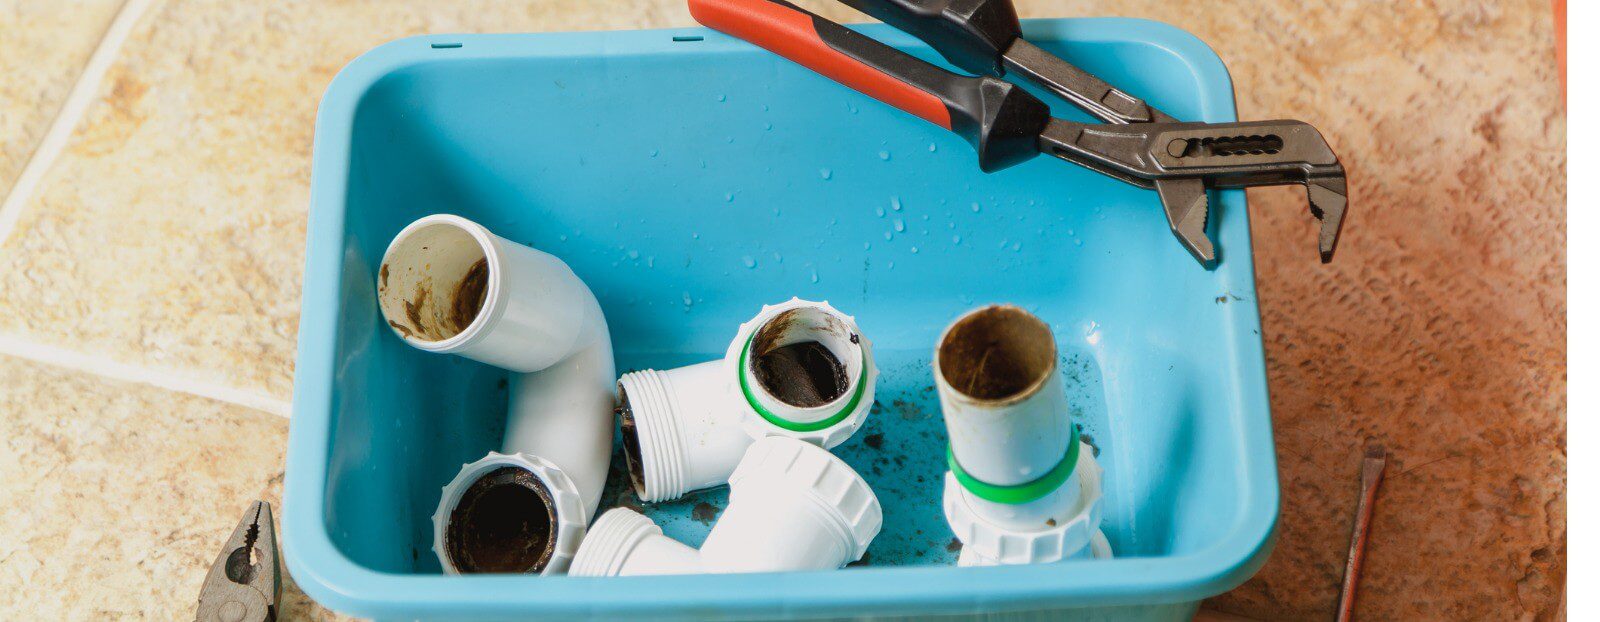 Smelly Drains? Here’s What To Do Banner Image